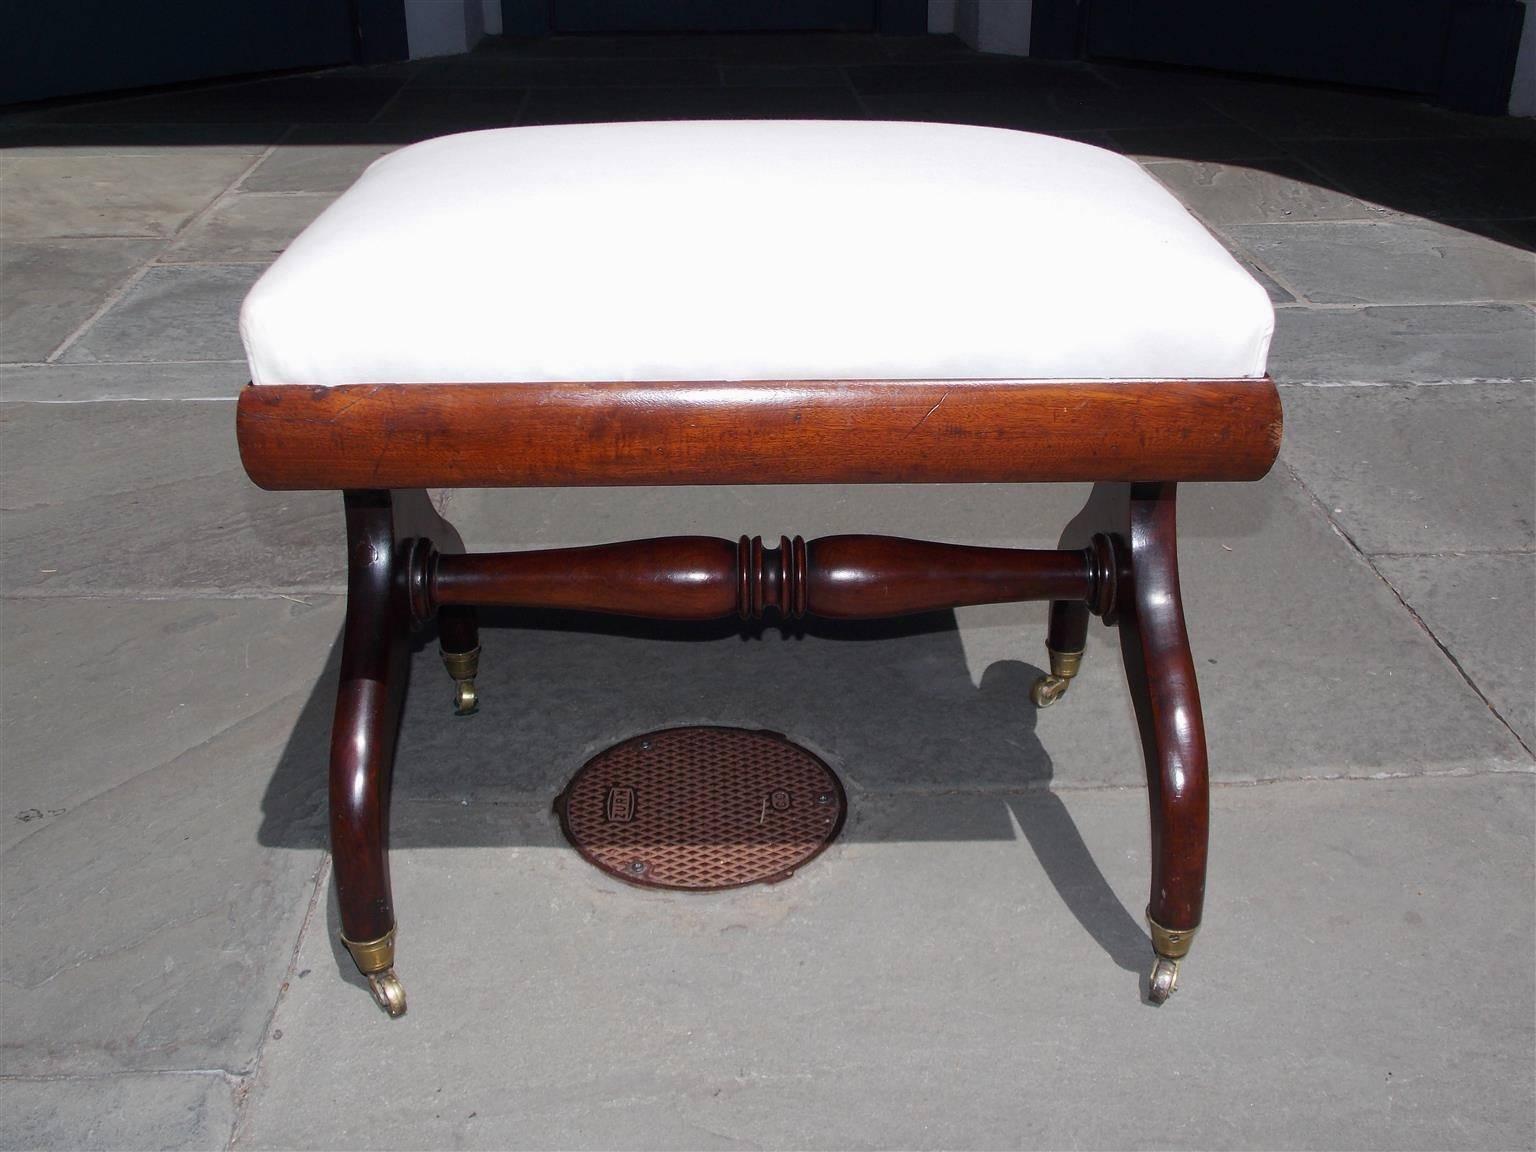 English Regency mahogany stool with a carved molded edge, stylized floral motif, turned bulbous ringed stretcher, and terminating on scrolled legs with the original brass casters. Stool is upholstered in white muslin, Early 19th century.